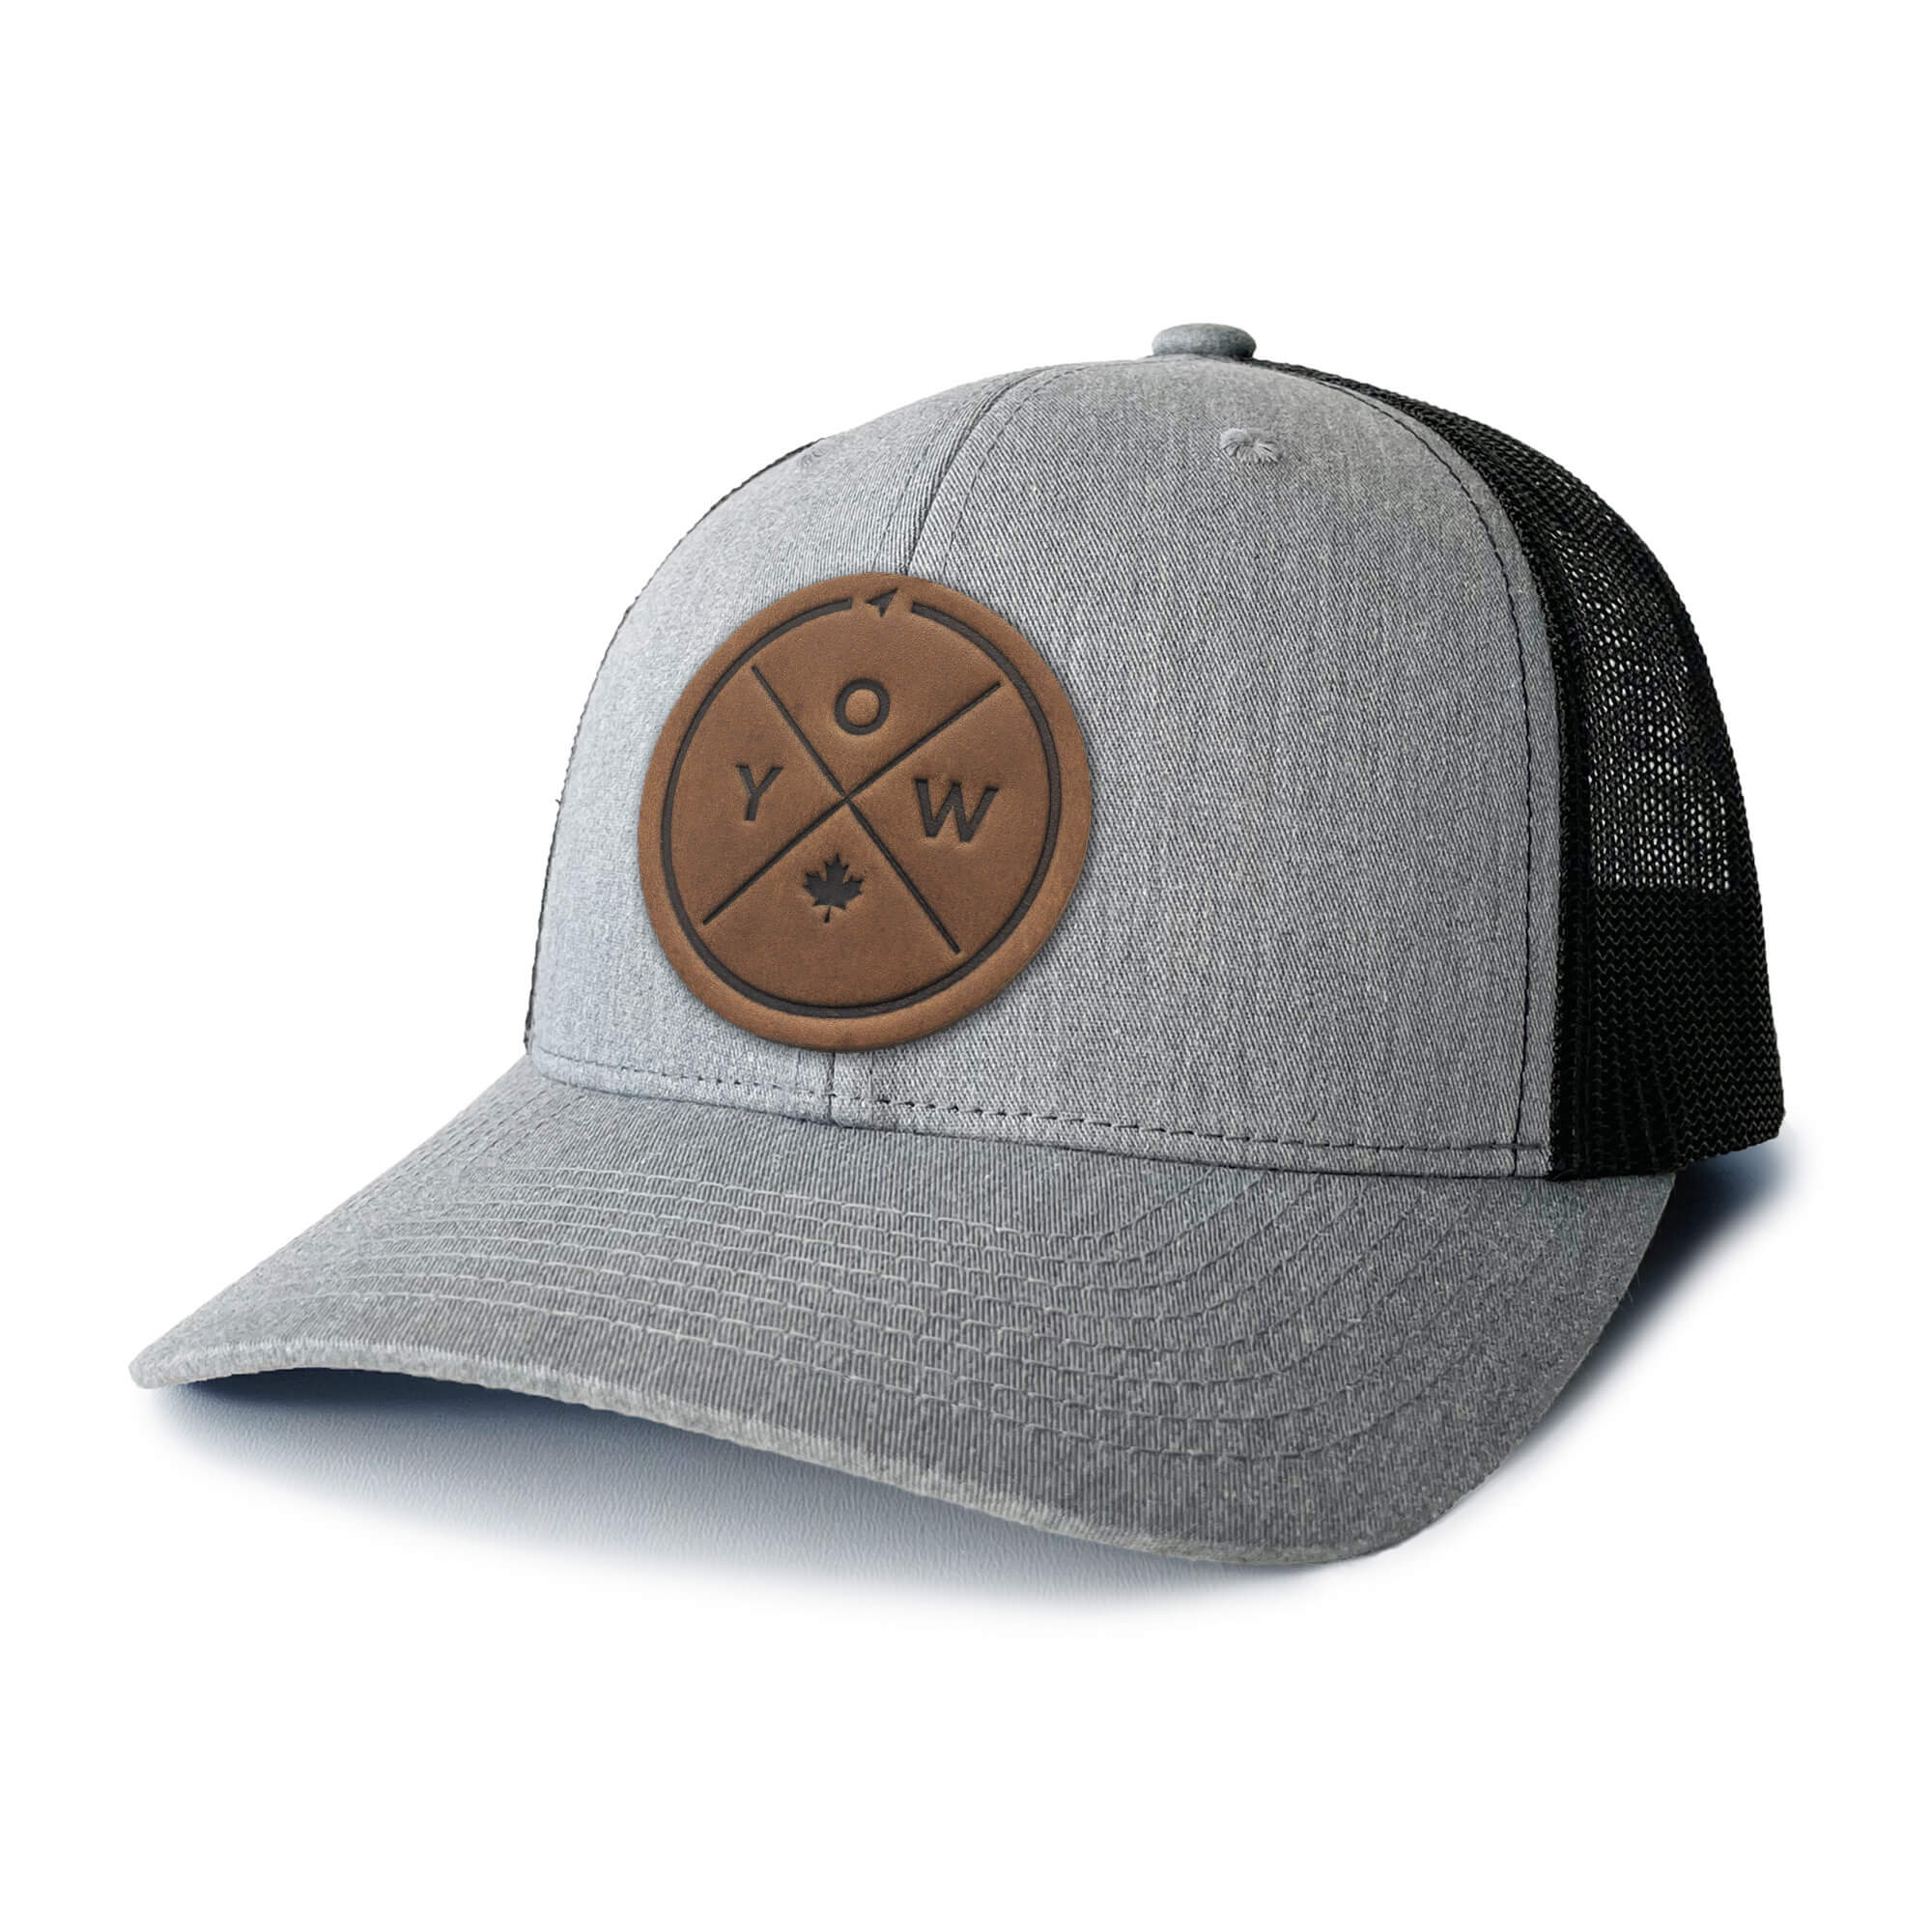 Heather Grey and white trucker hat with full-grain leather patch with YOW embossing | BLACK-002-008, CHARC-002-008, NAVY-002-008, HGREY-002-008, MOSS-002-008, BROWN-002-008